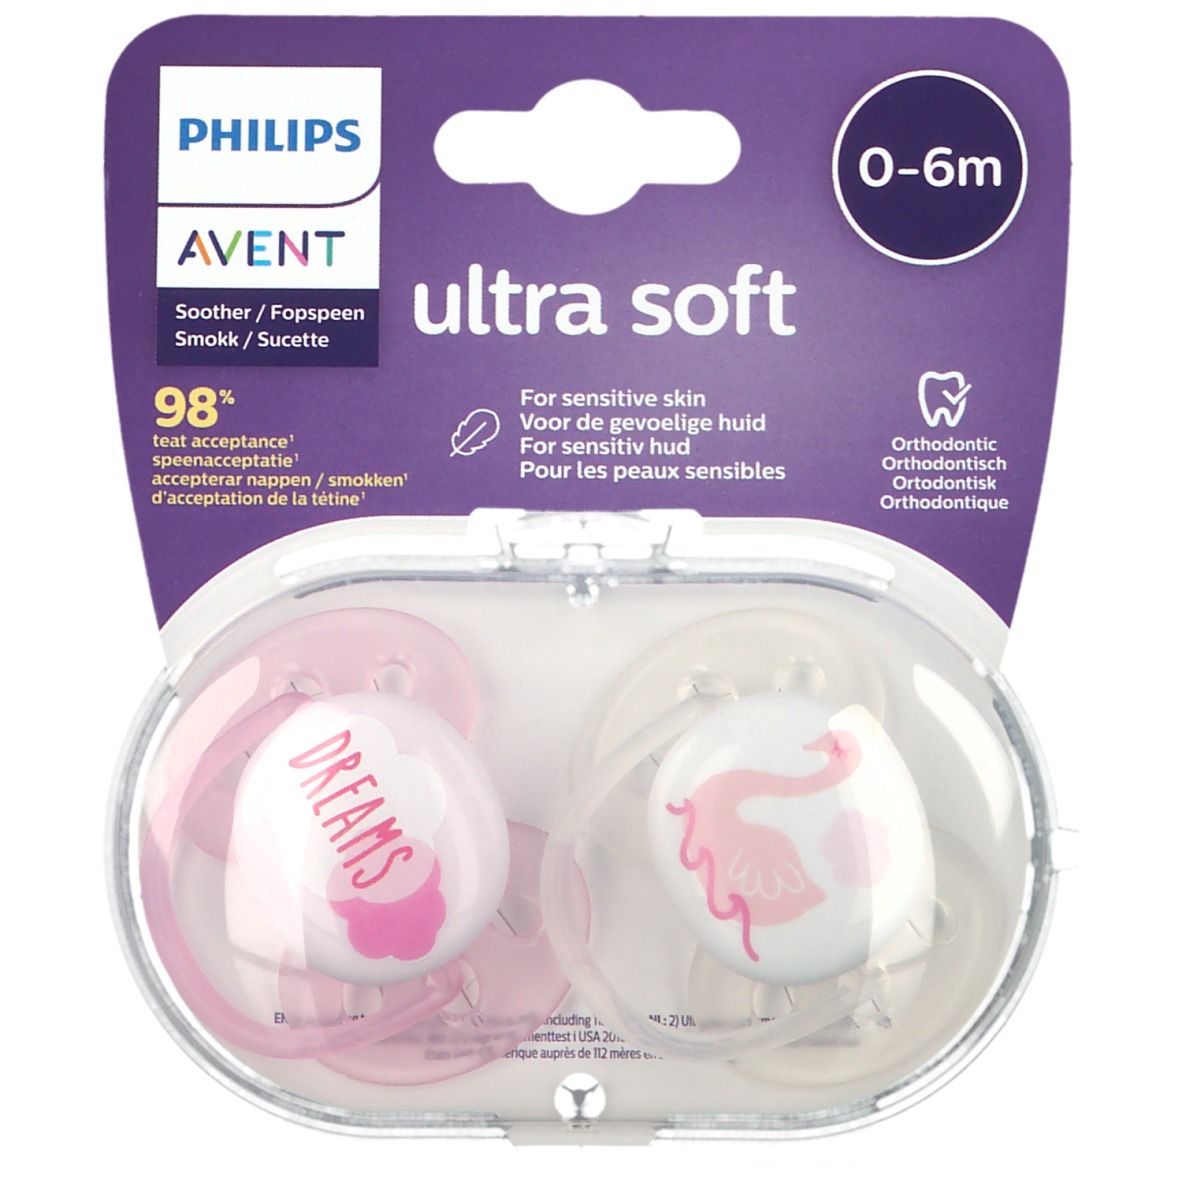 Philips AVENT Ultra Soft Tétines Girl 0-6 mois (Couleur non